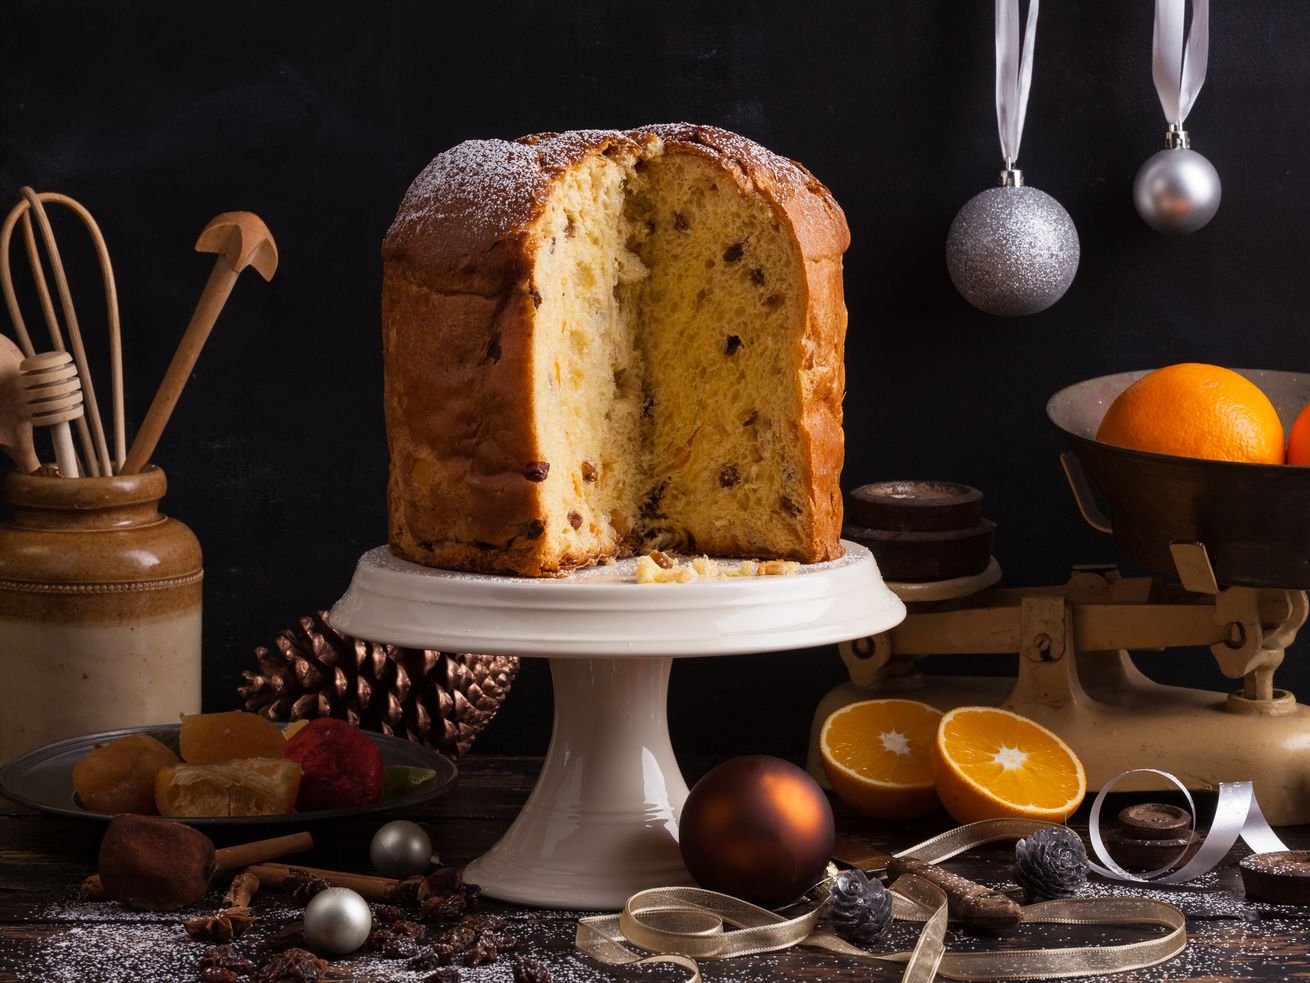 Three quarters of a panettone, with the fluffy yellow and fruit-studded inside of the loaf facing the camera, on a white cake plate, next to a bowl of oranges, Christmas ornaments, and cooking tools.